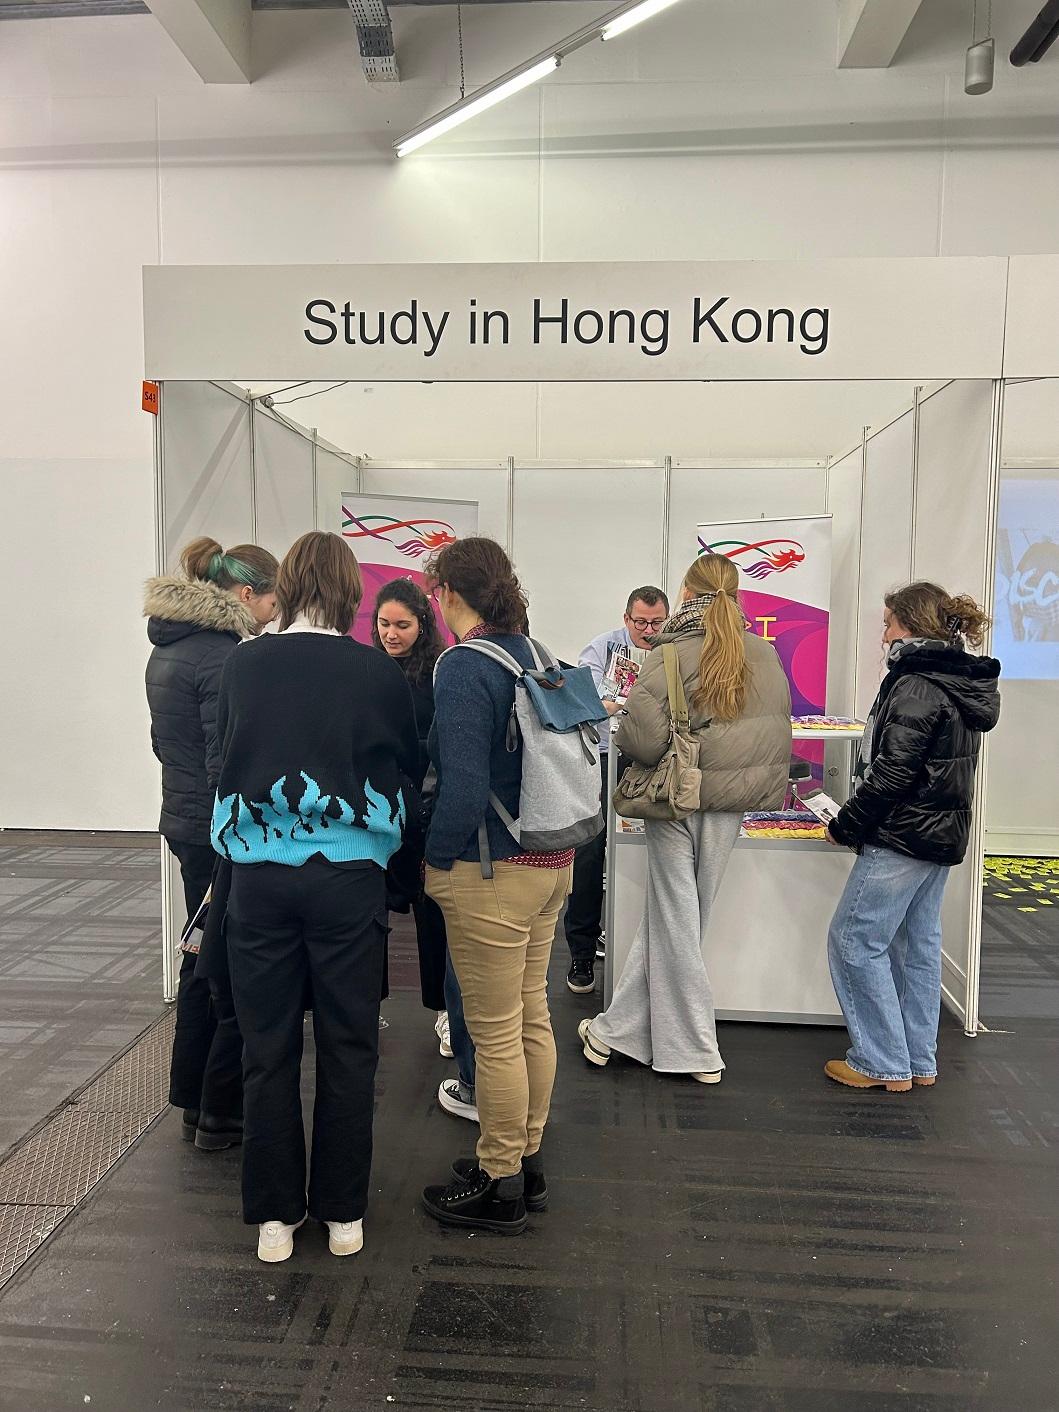 The Hong Kong Economic and Trade Office, Berlin hosted a booth at the German education fair Einstieg in Munich, Berlin, on November 24 to 25 (Munich time) to inform over 7 000 participants from Germany about the exciting study opportunities that Hong Kong has to offer.